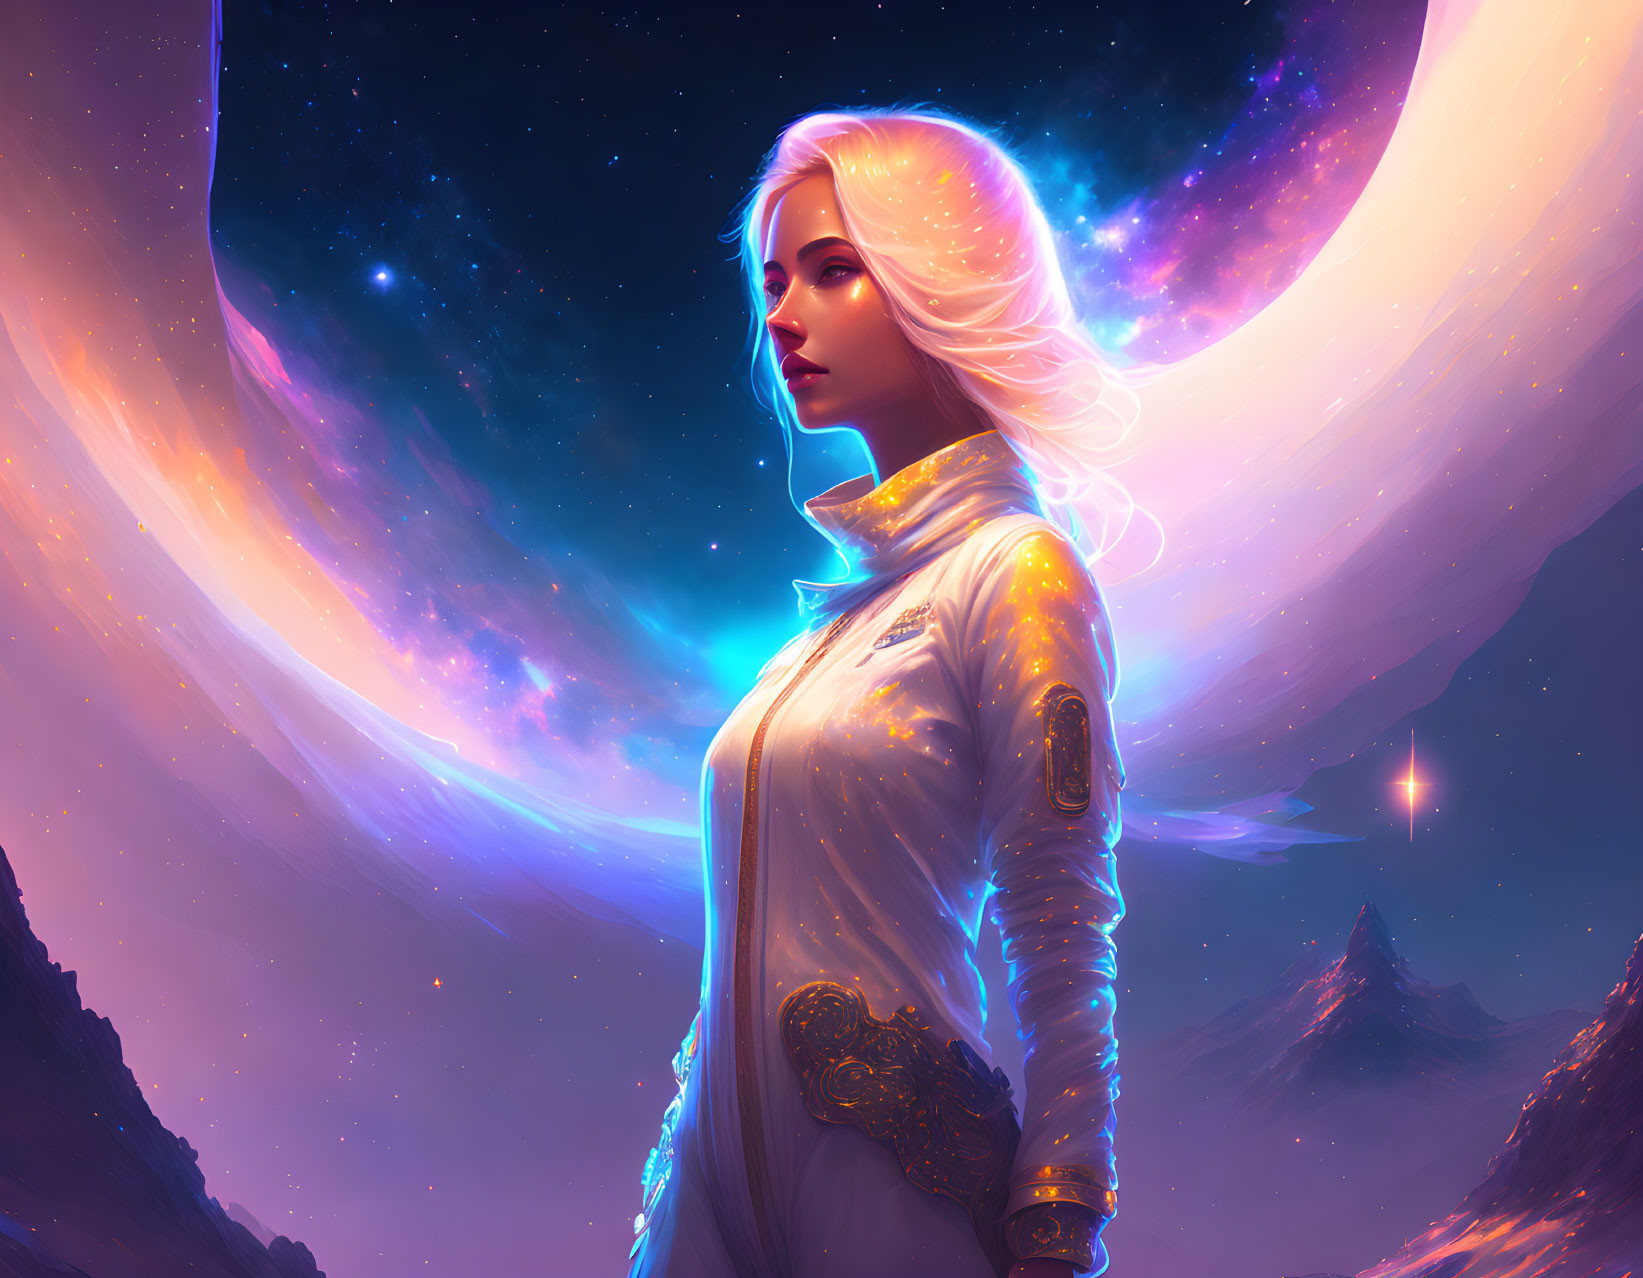 Digital artwork of woman with white hair under crescent moon